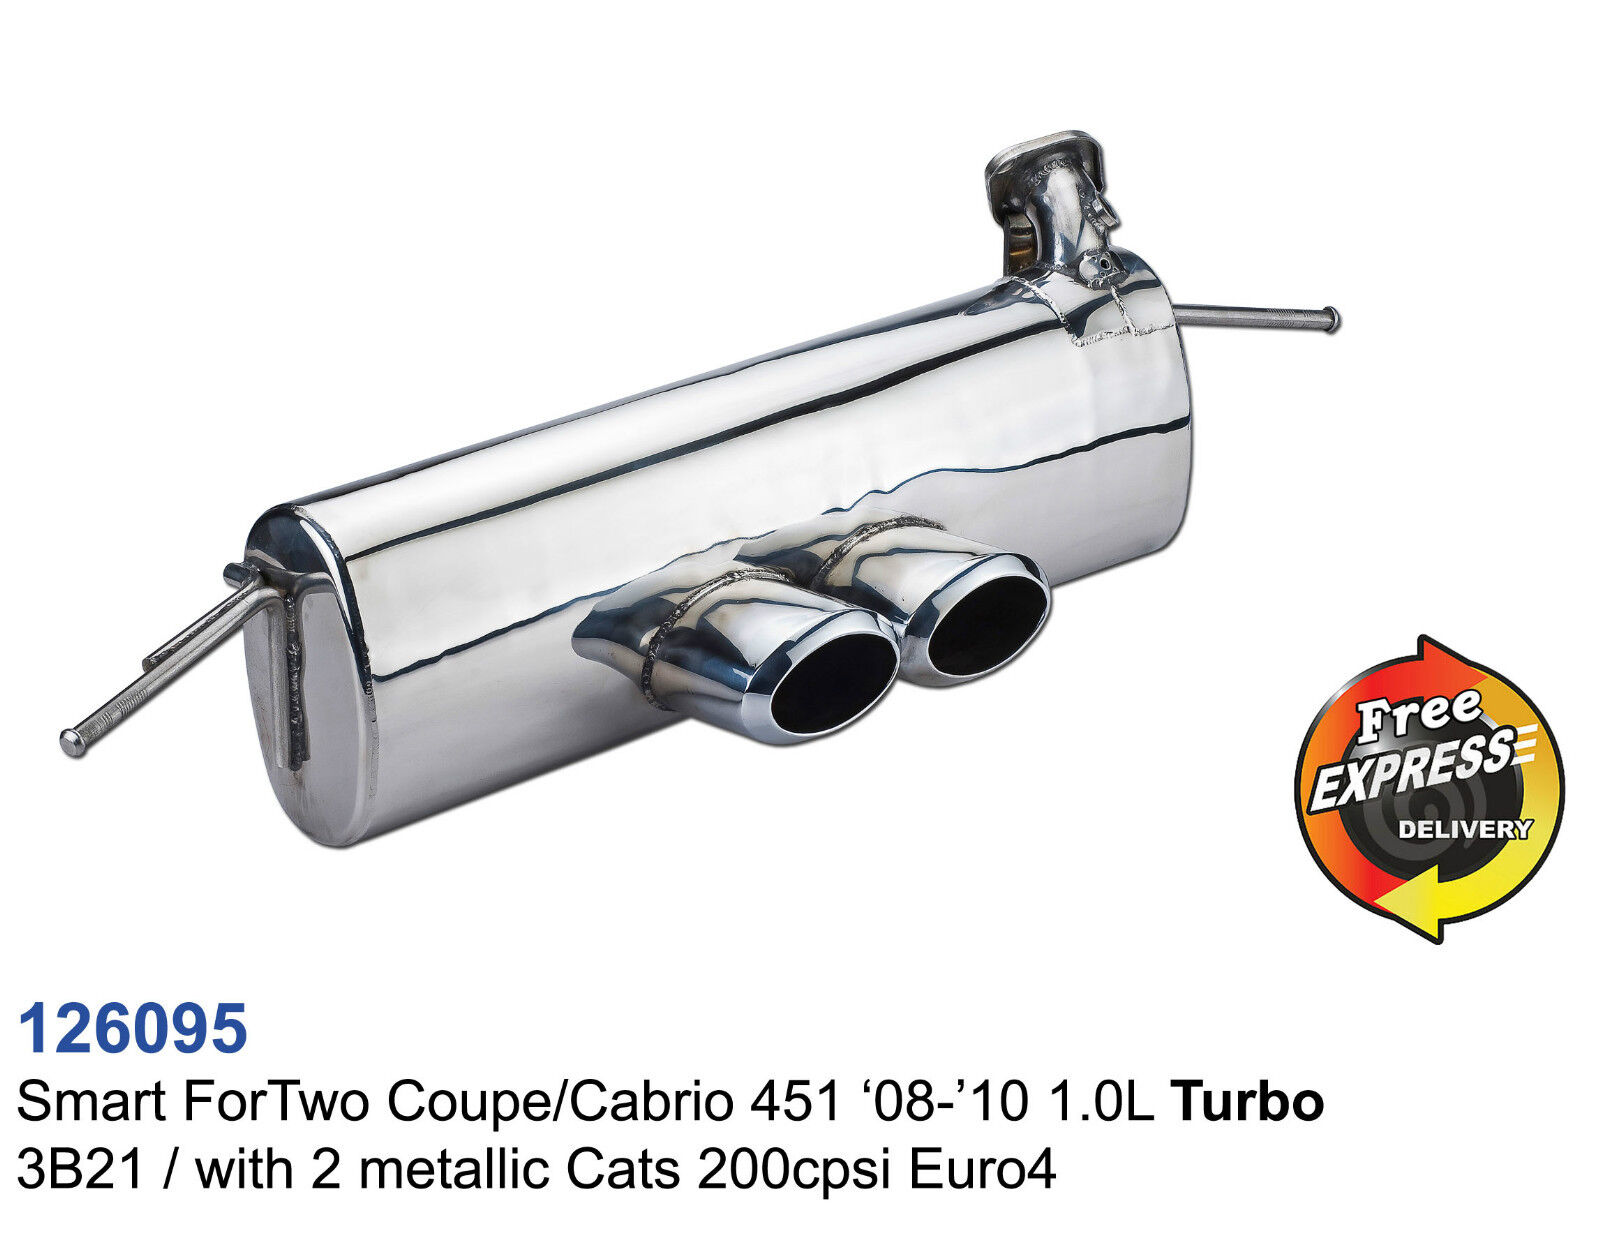 Performance Exhaust Muffler for Smart ForTwo Coupe/Cabrio 451 3B21 '08-'10 1.0L